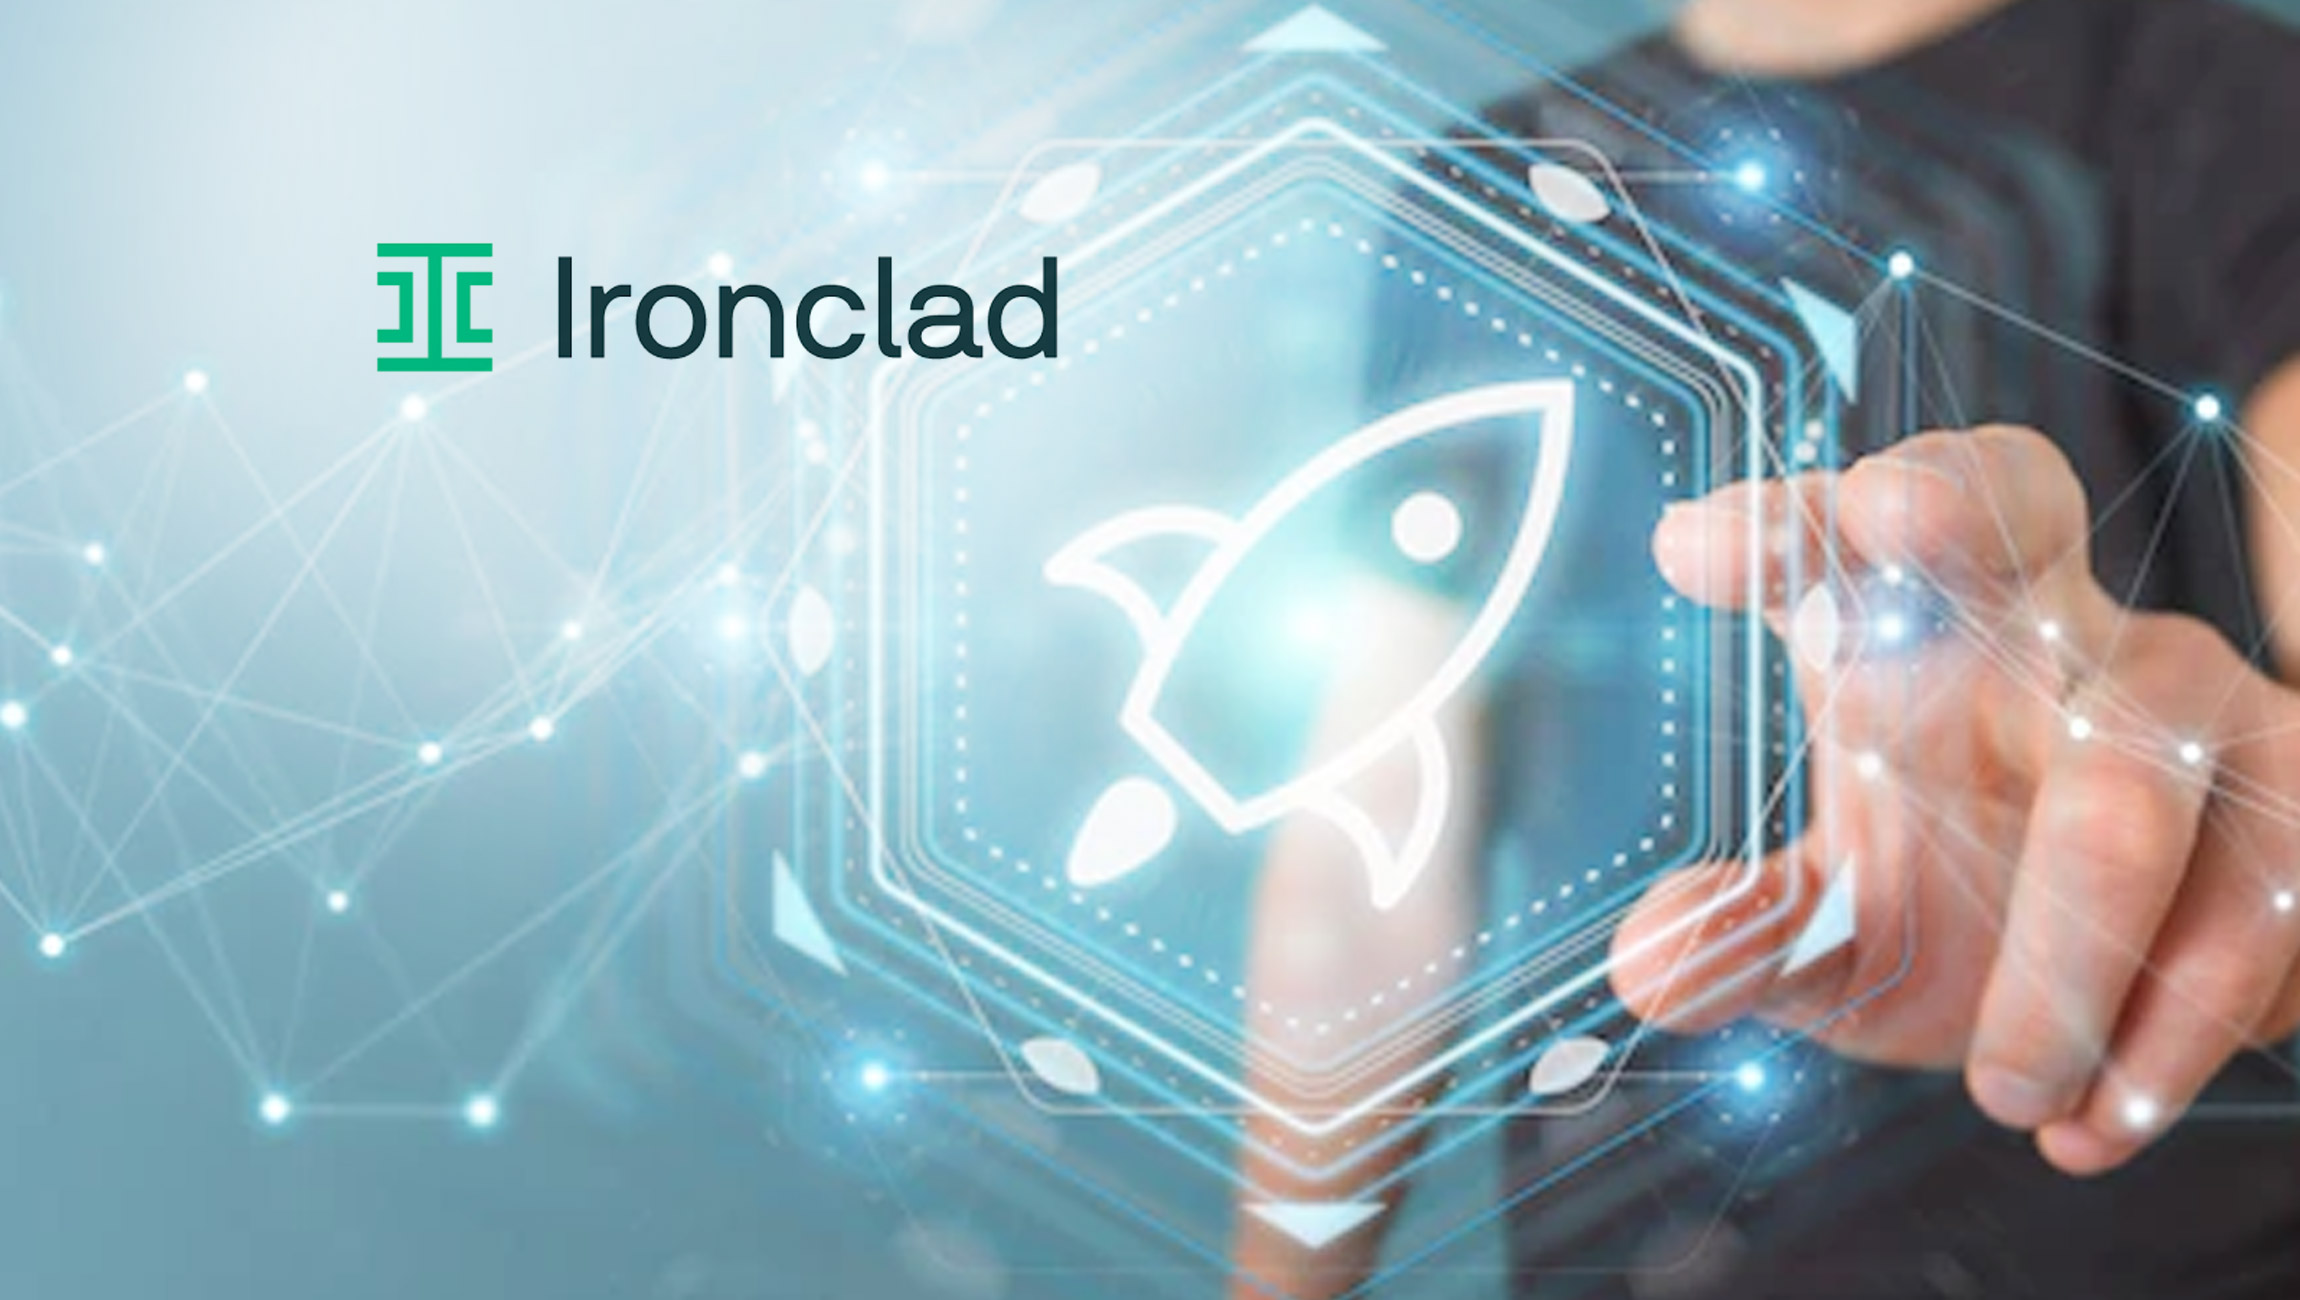 Ironclad Launches First Phase of Digital Contracting Certification Program to Verify Skills, Give Professionals New Ways to Stand Out in the Workplace